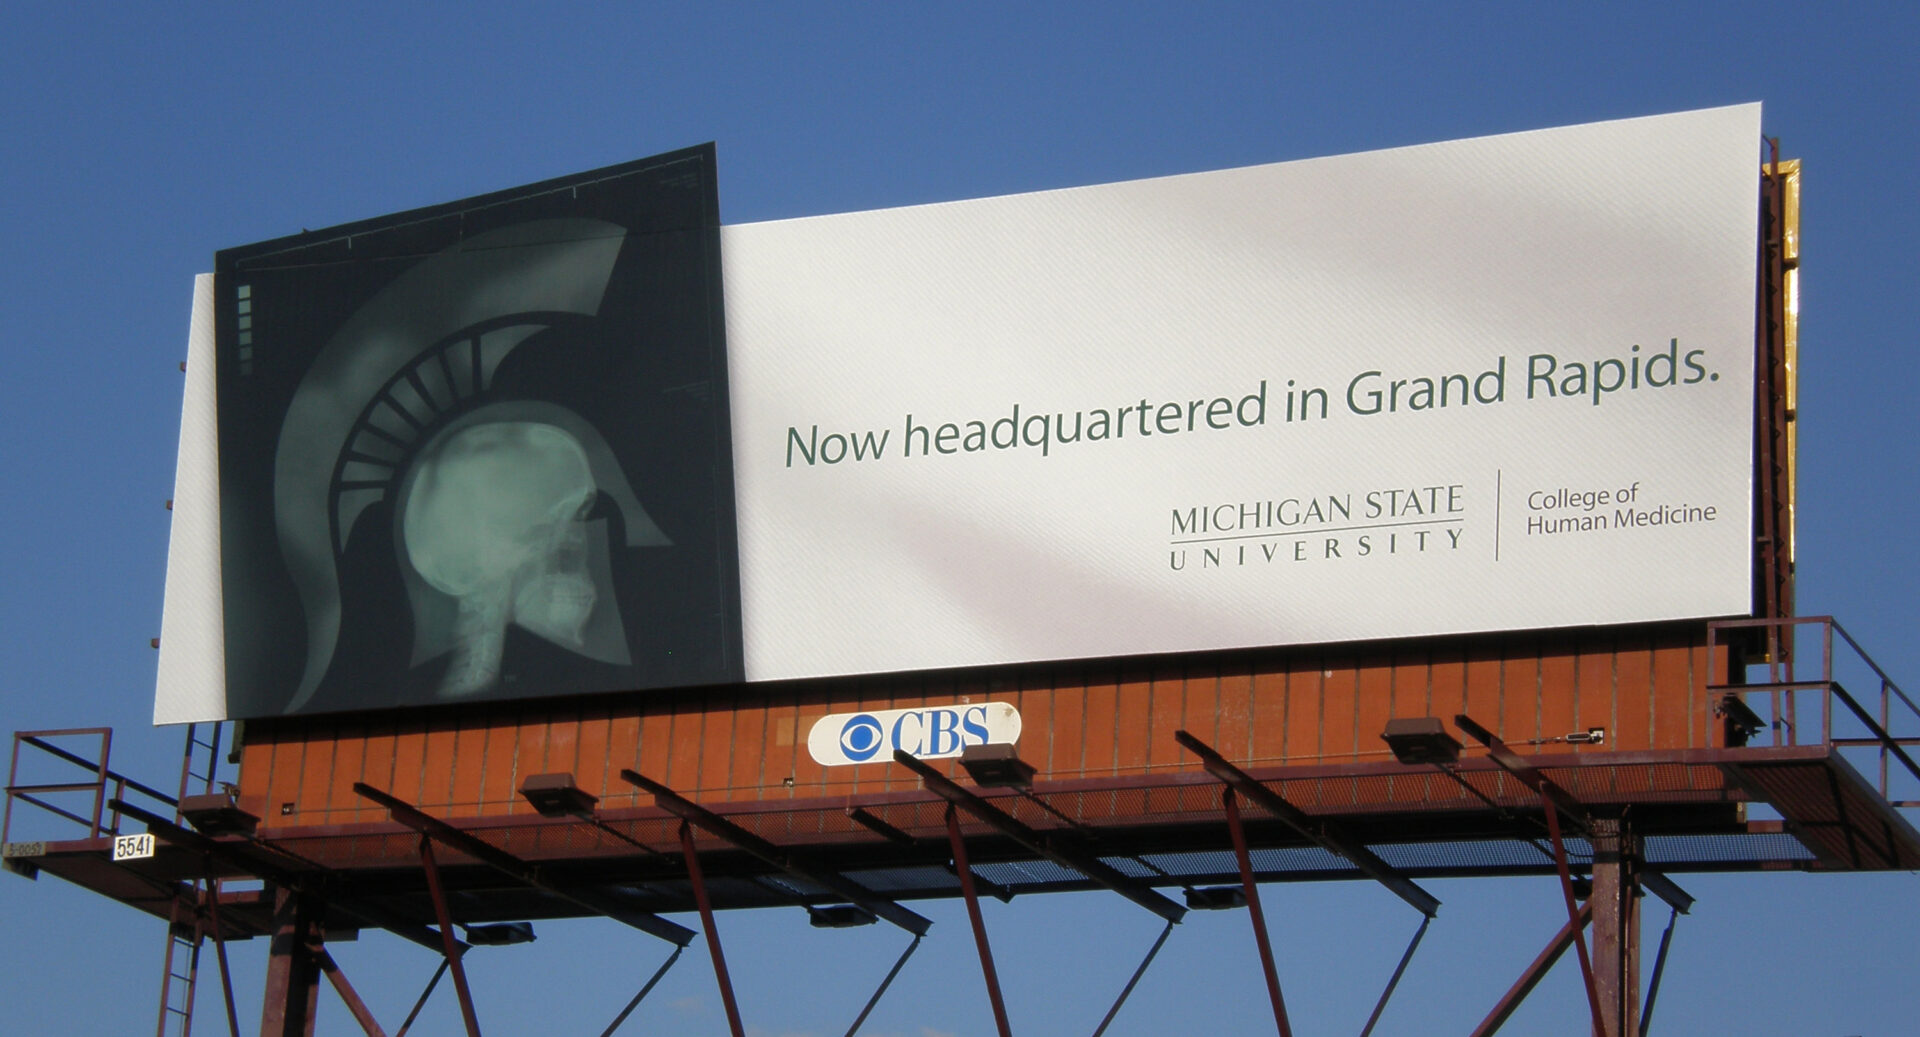 "Now headquartered in Grand Rapids." out of home bulletin.